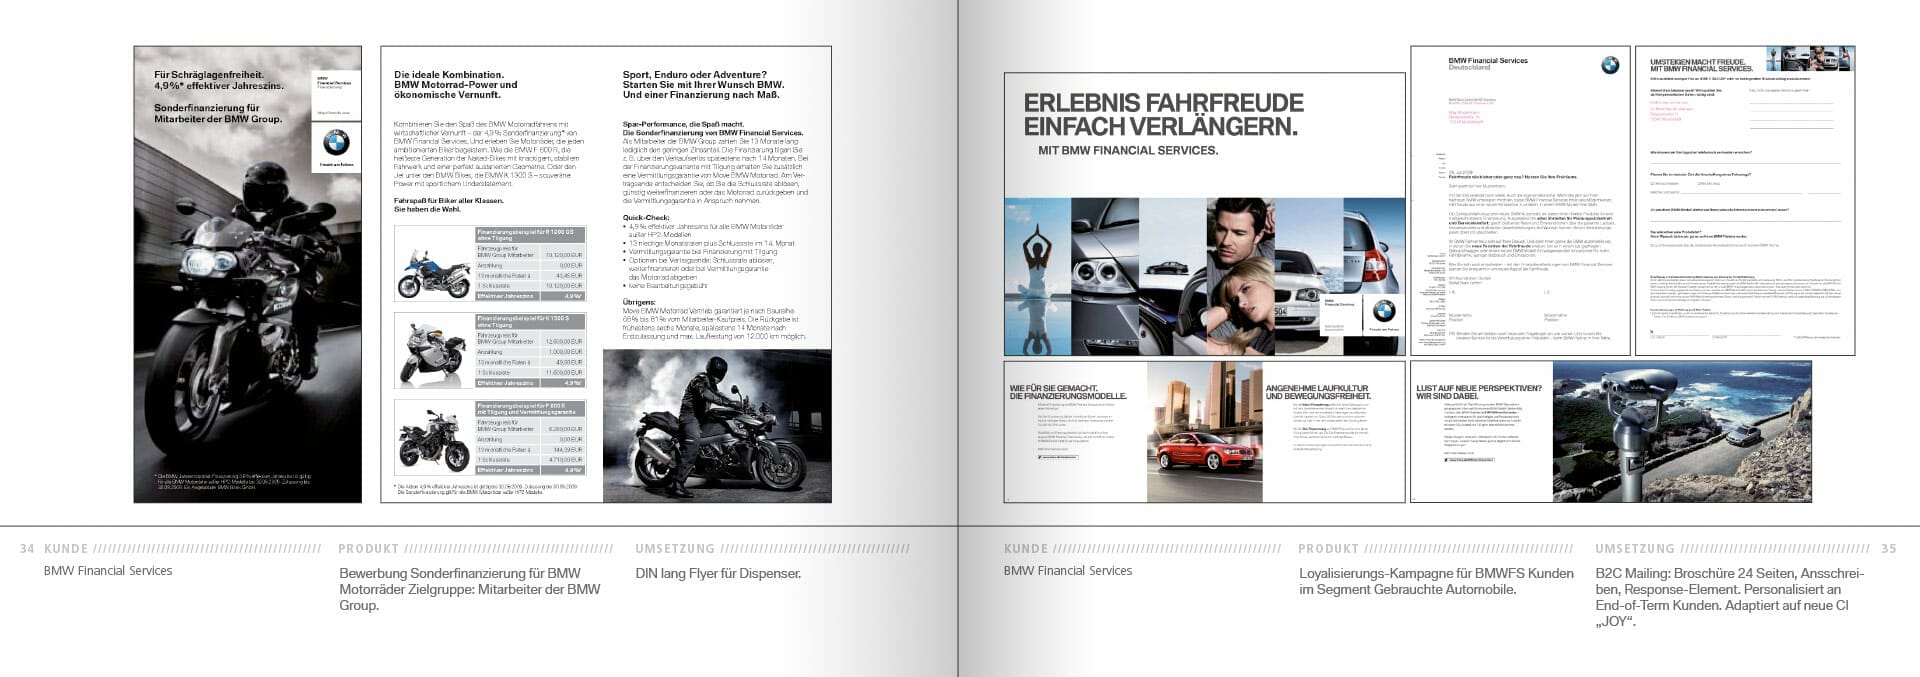 BMW Group Works 2001-2009 Booklet 34-35